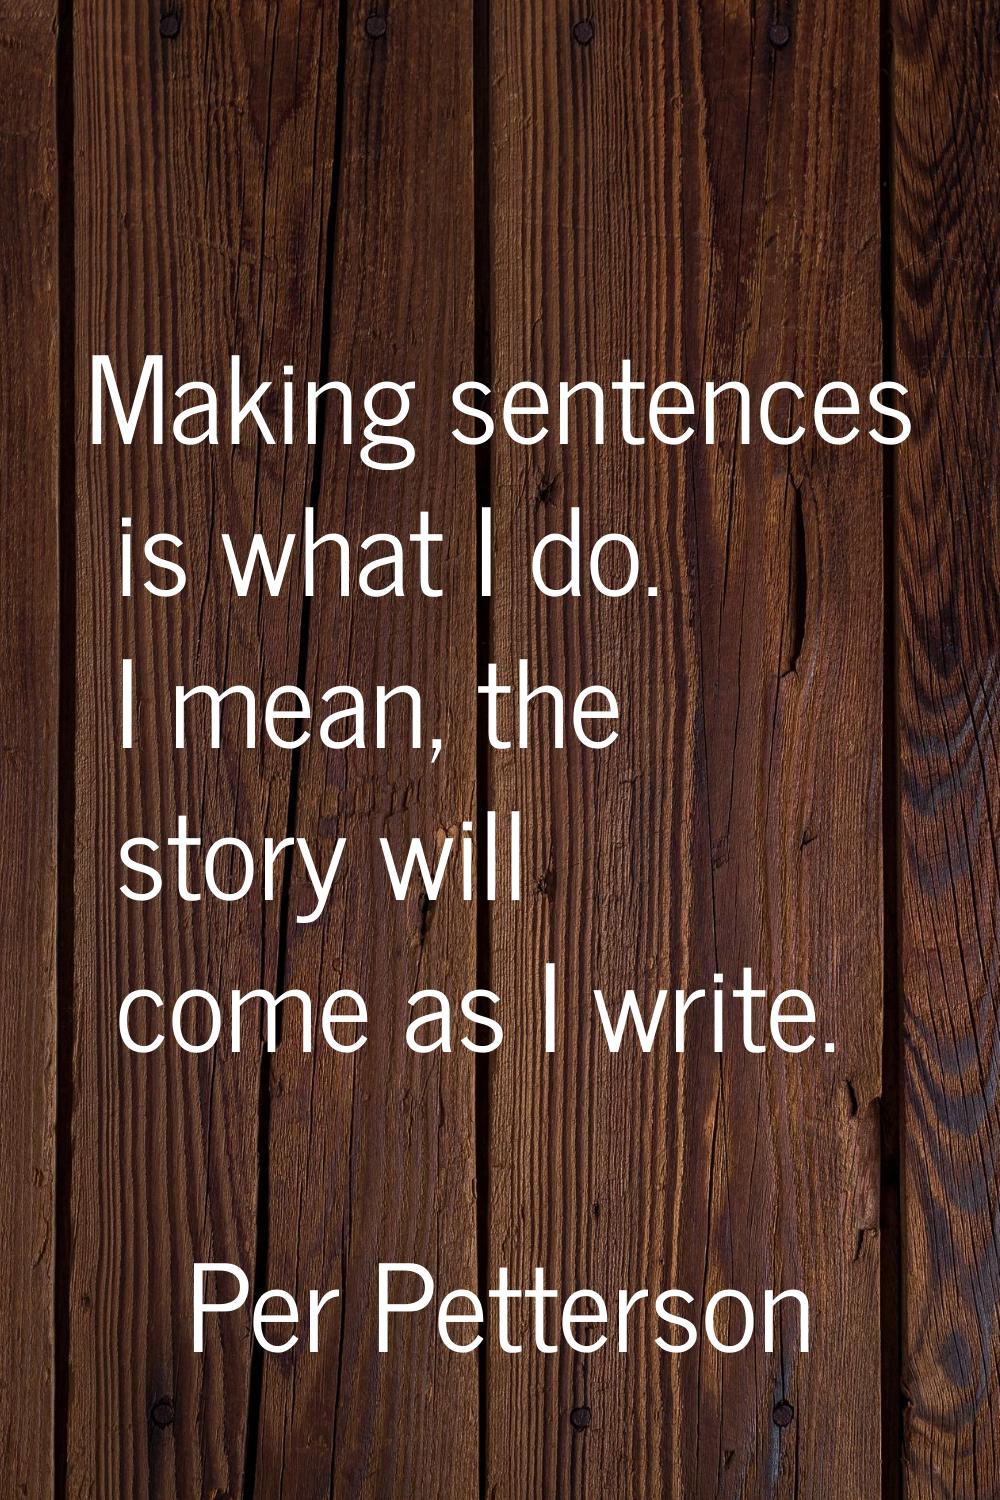 Making sentences is what I do. I mean, the story will come as I write.